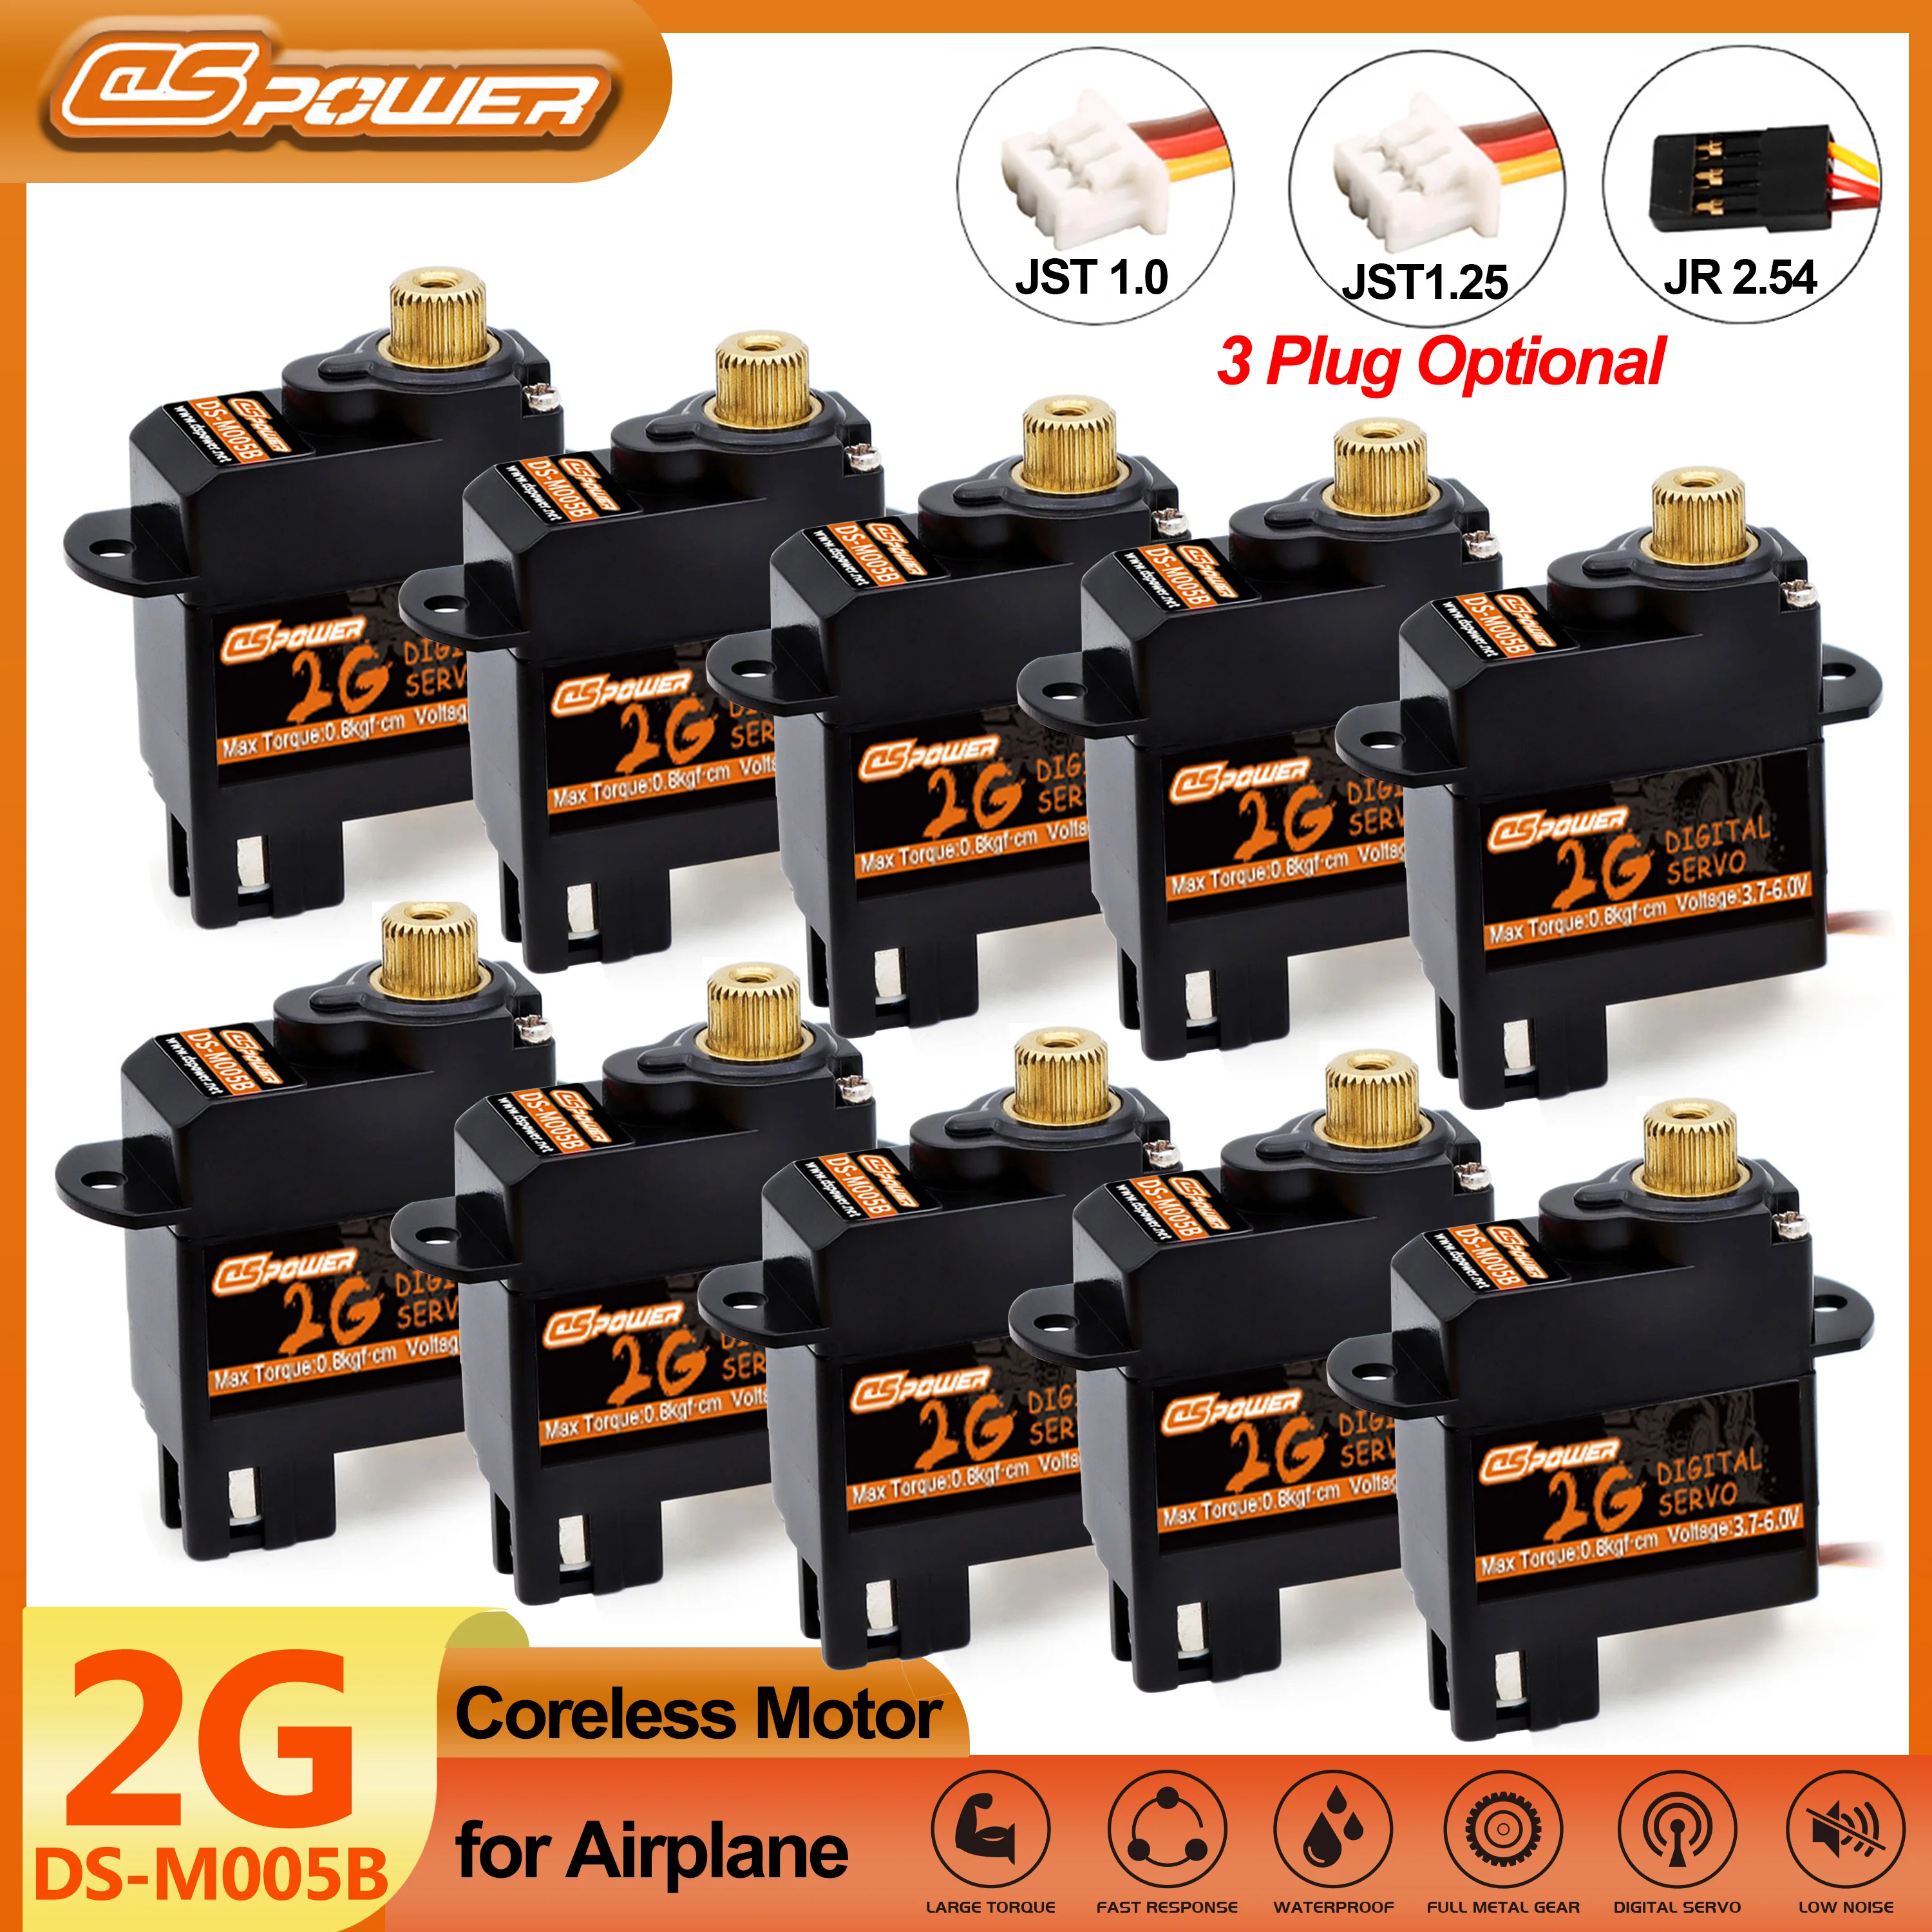 

DSPOWER 2g Motor Servo Metal Gear Mini Micro Servos for RC Car Airplanes Fixed-wing Quadcopter Helicopter Boat Duct Plane Robot